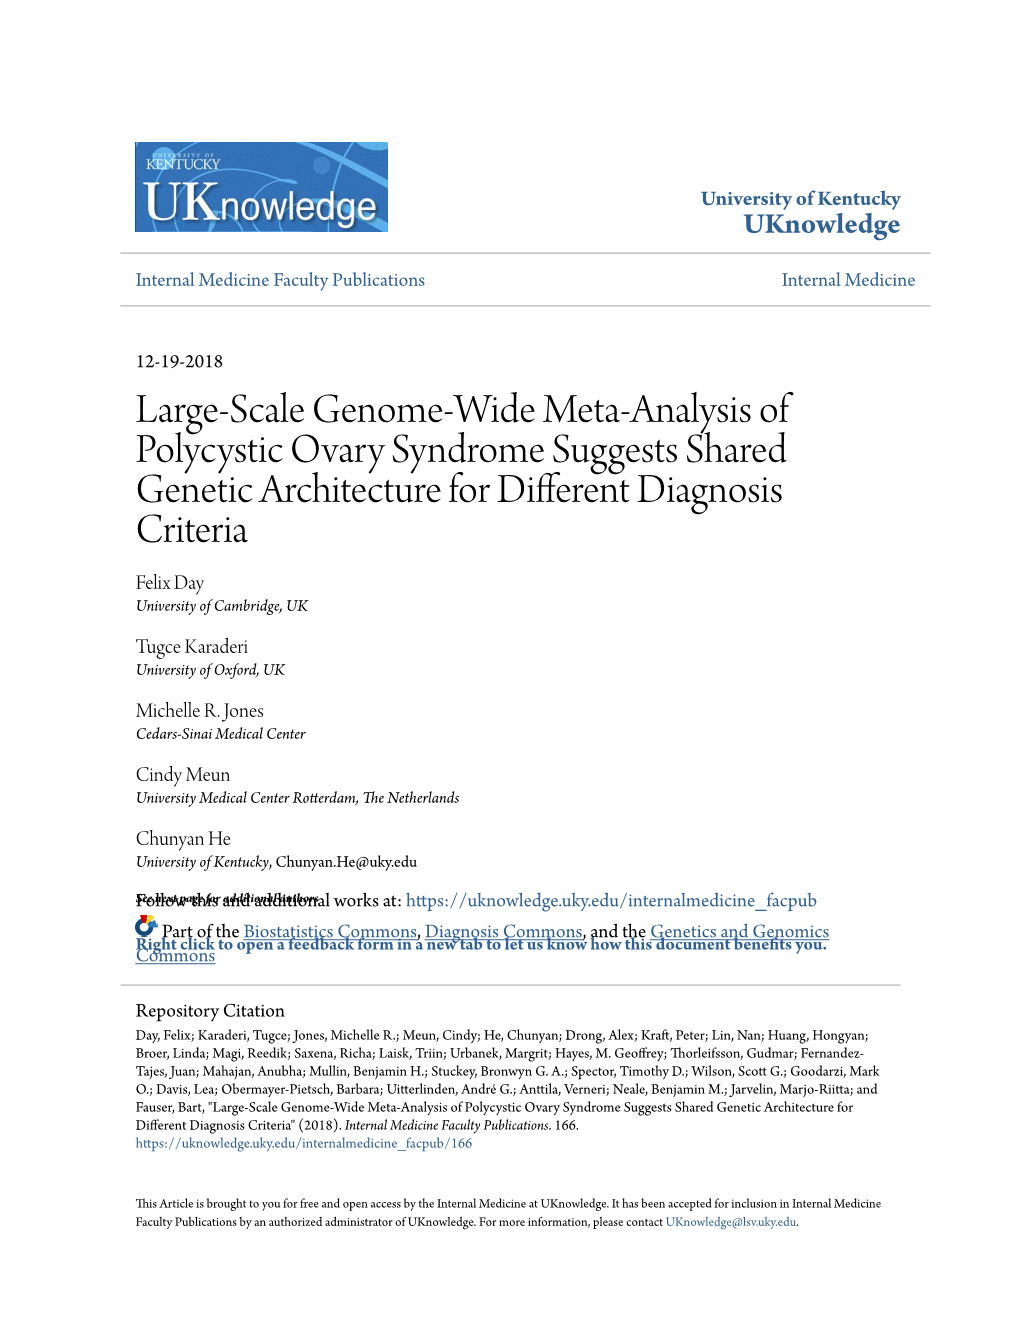 Large-Scale Genome-Wide Meta-Analysis of Polycystic Ovary